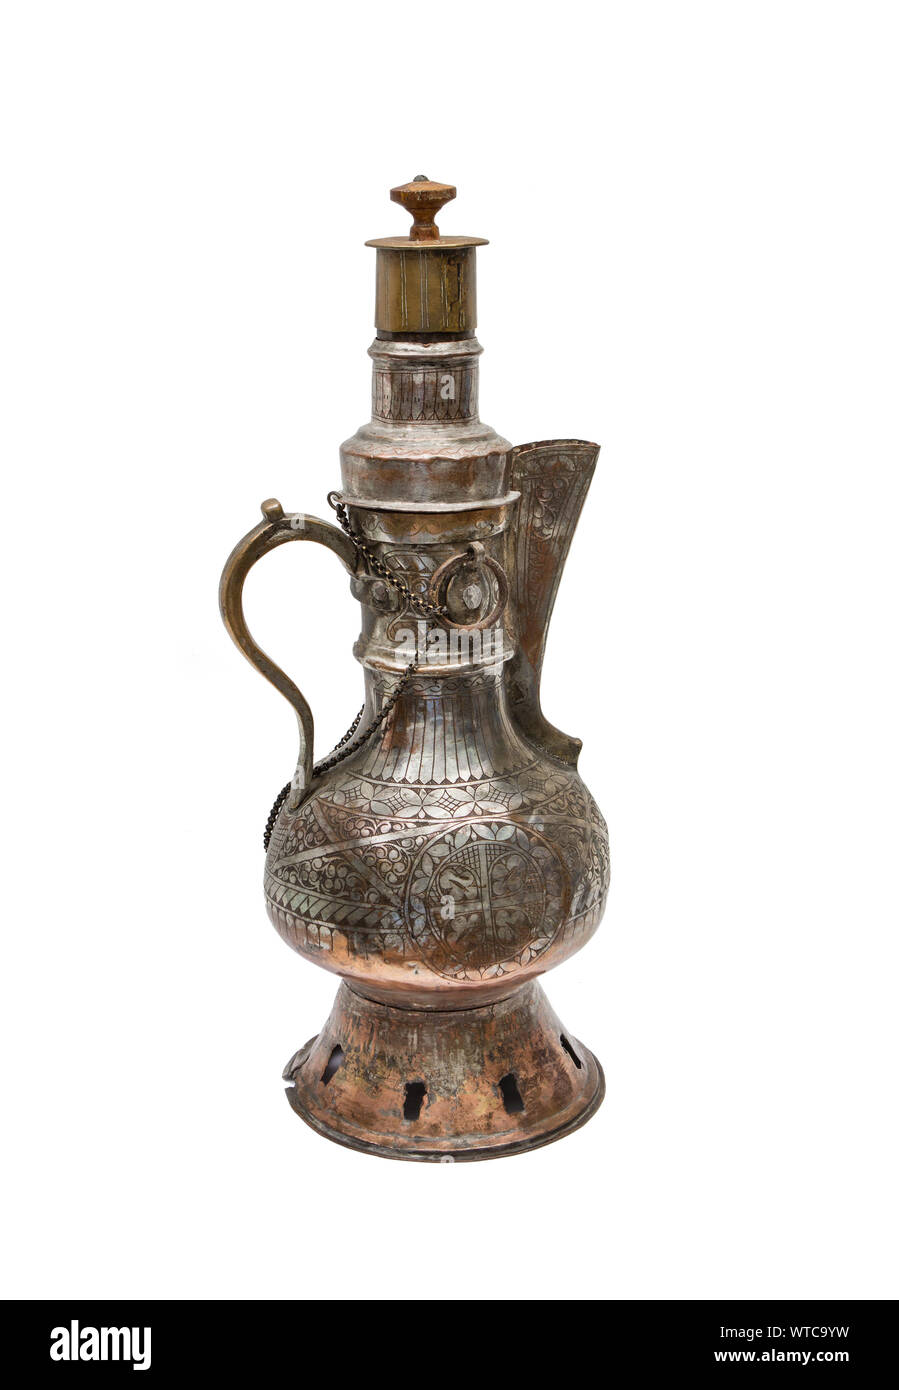 Central Asian kumgan of the 19th century made of hammered brass decorated with elaborate engraving. Stock Photo